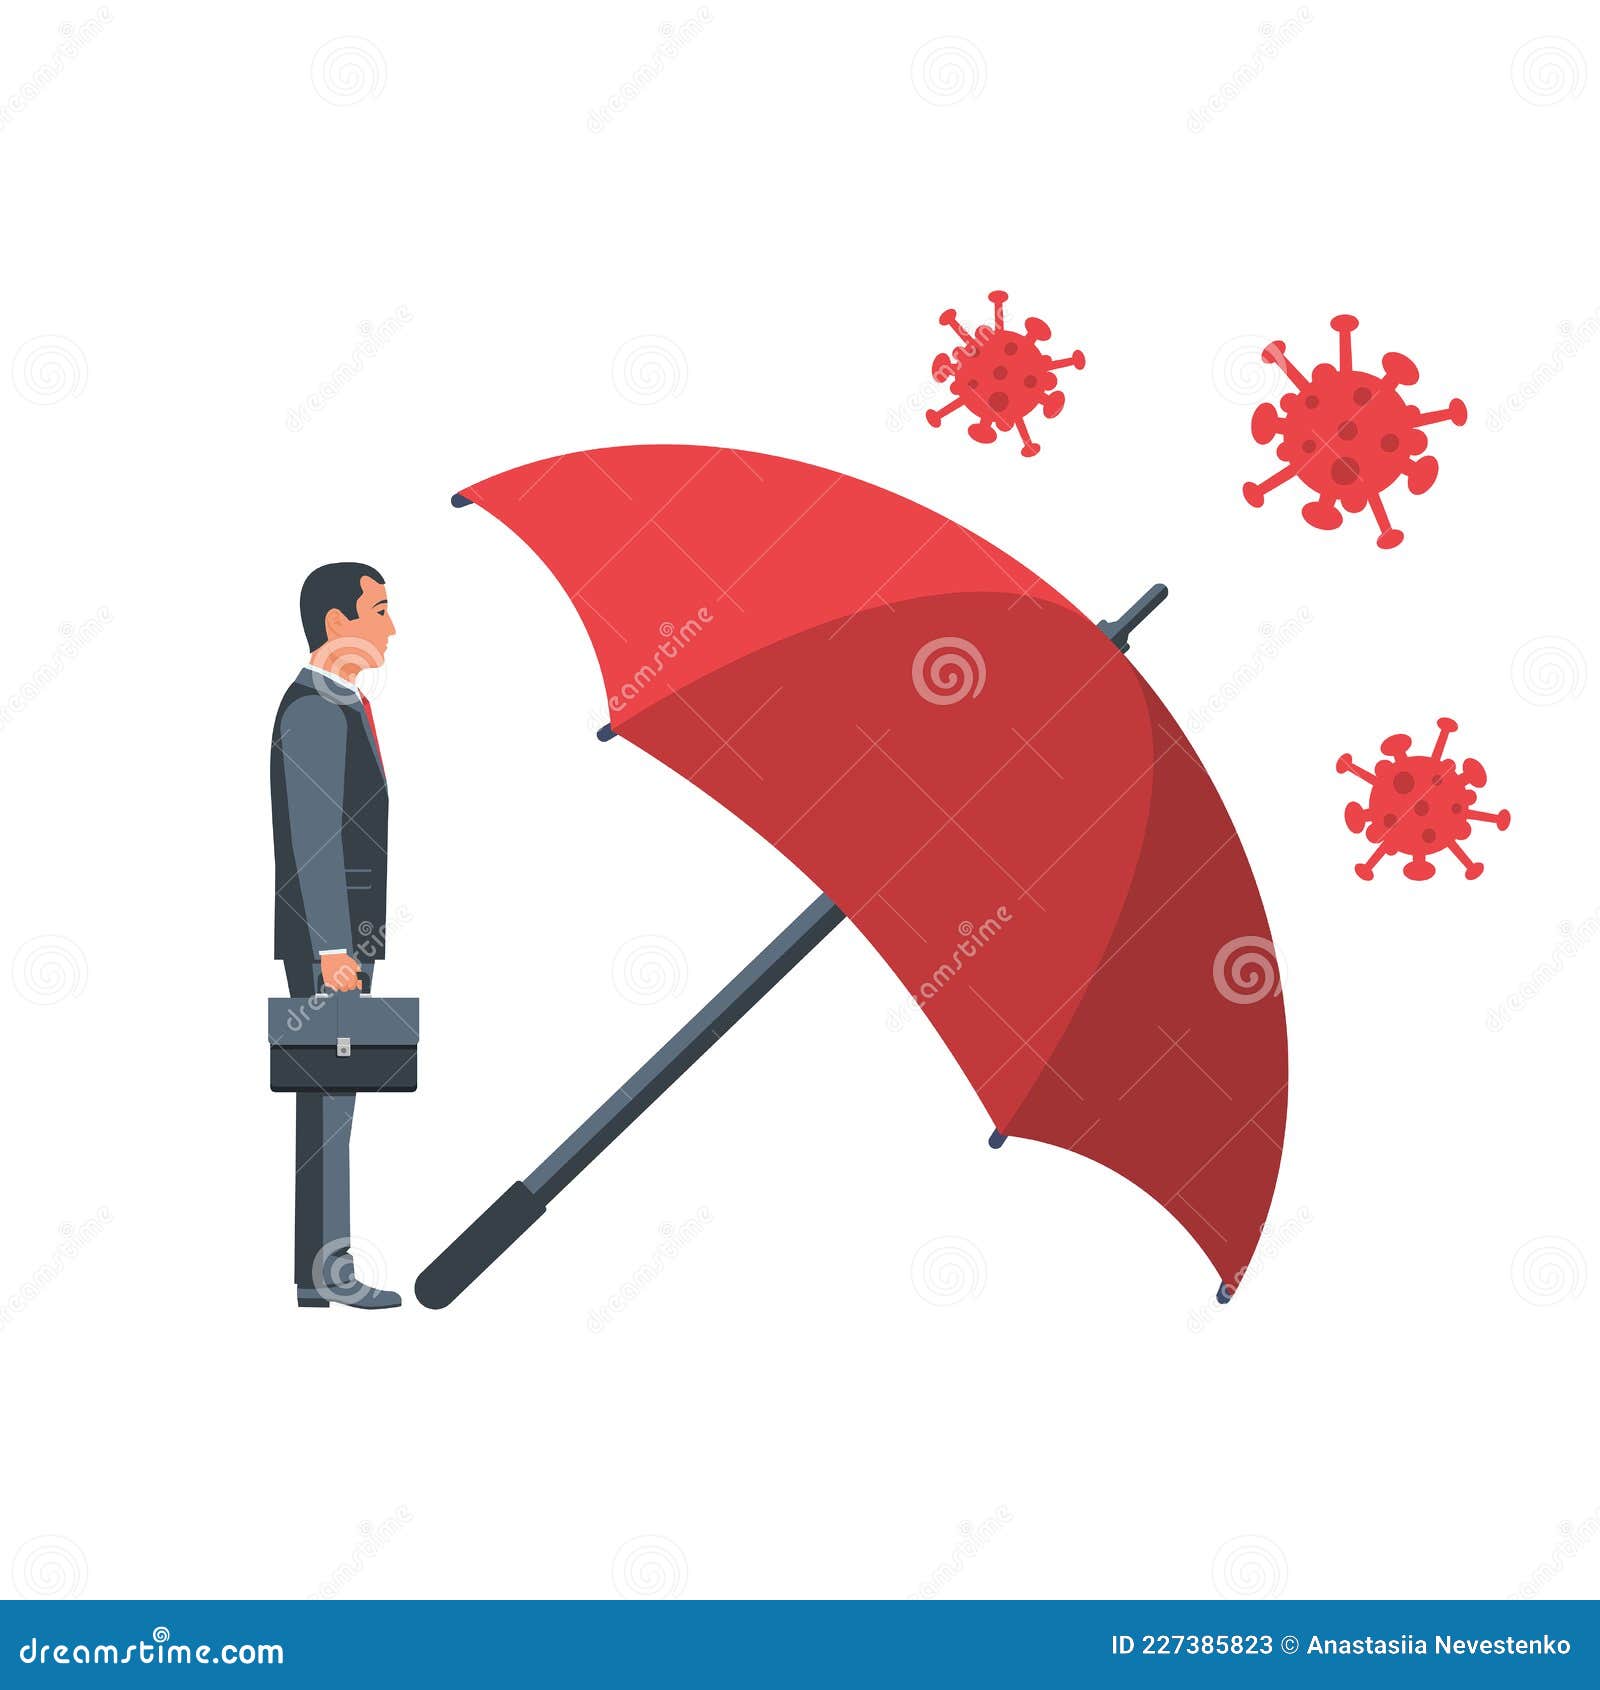 protect yourself Security Umbrella for women 